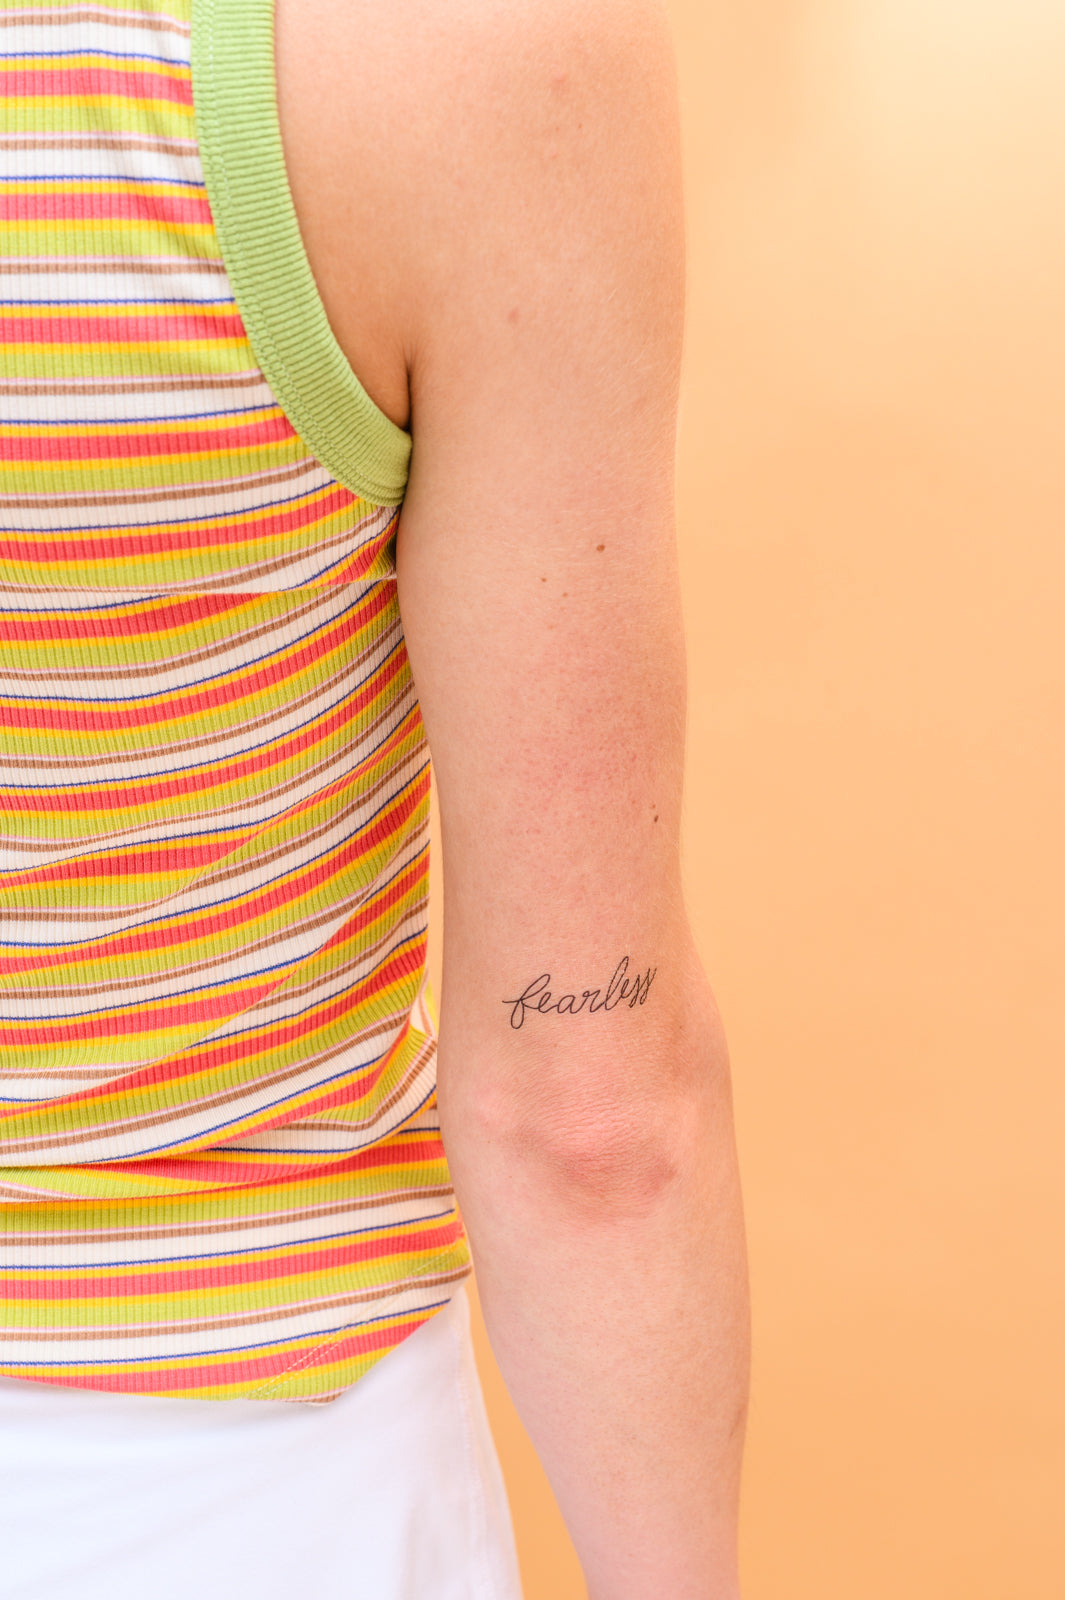 Fearless Words For A Season Temporary Tattoo